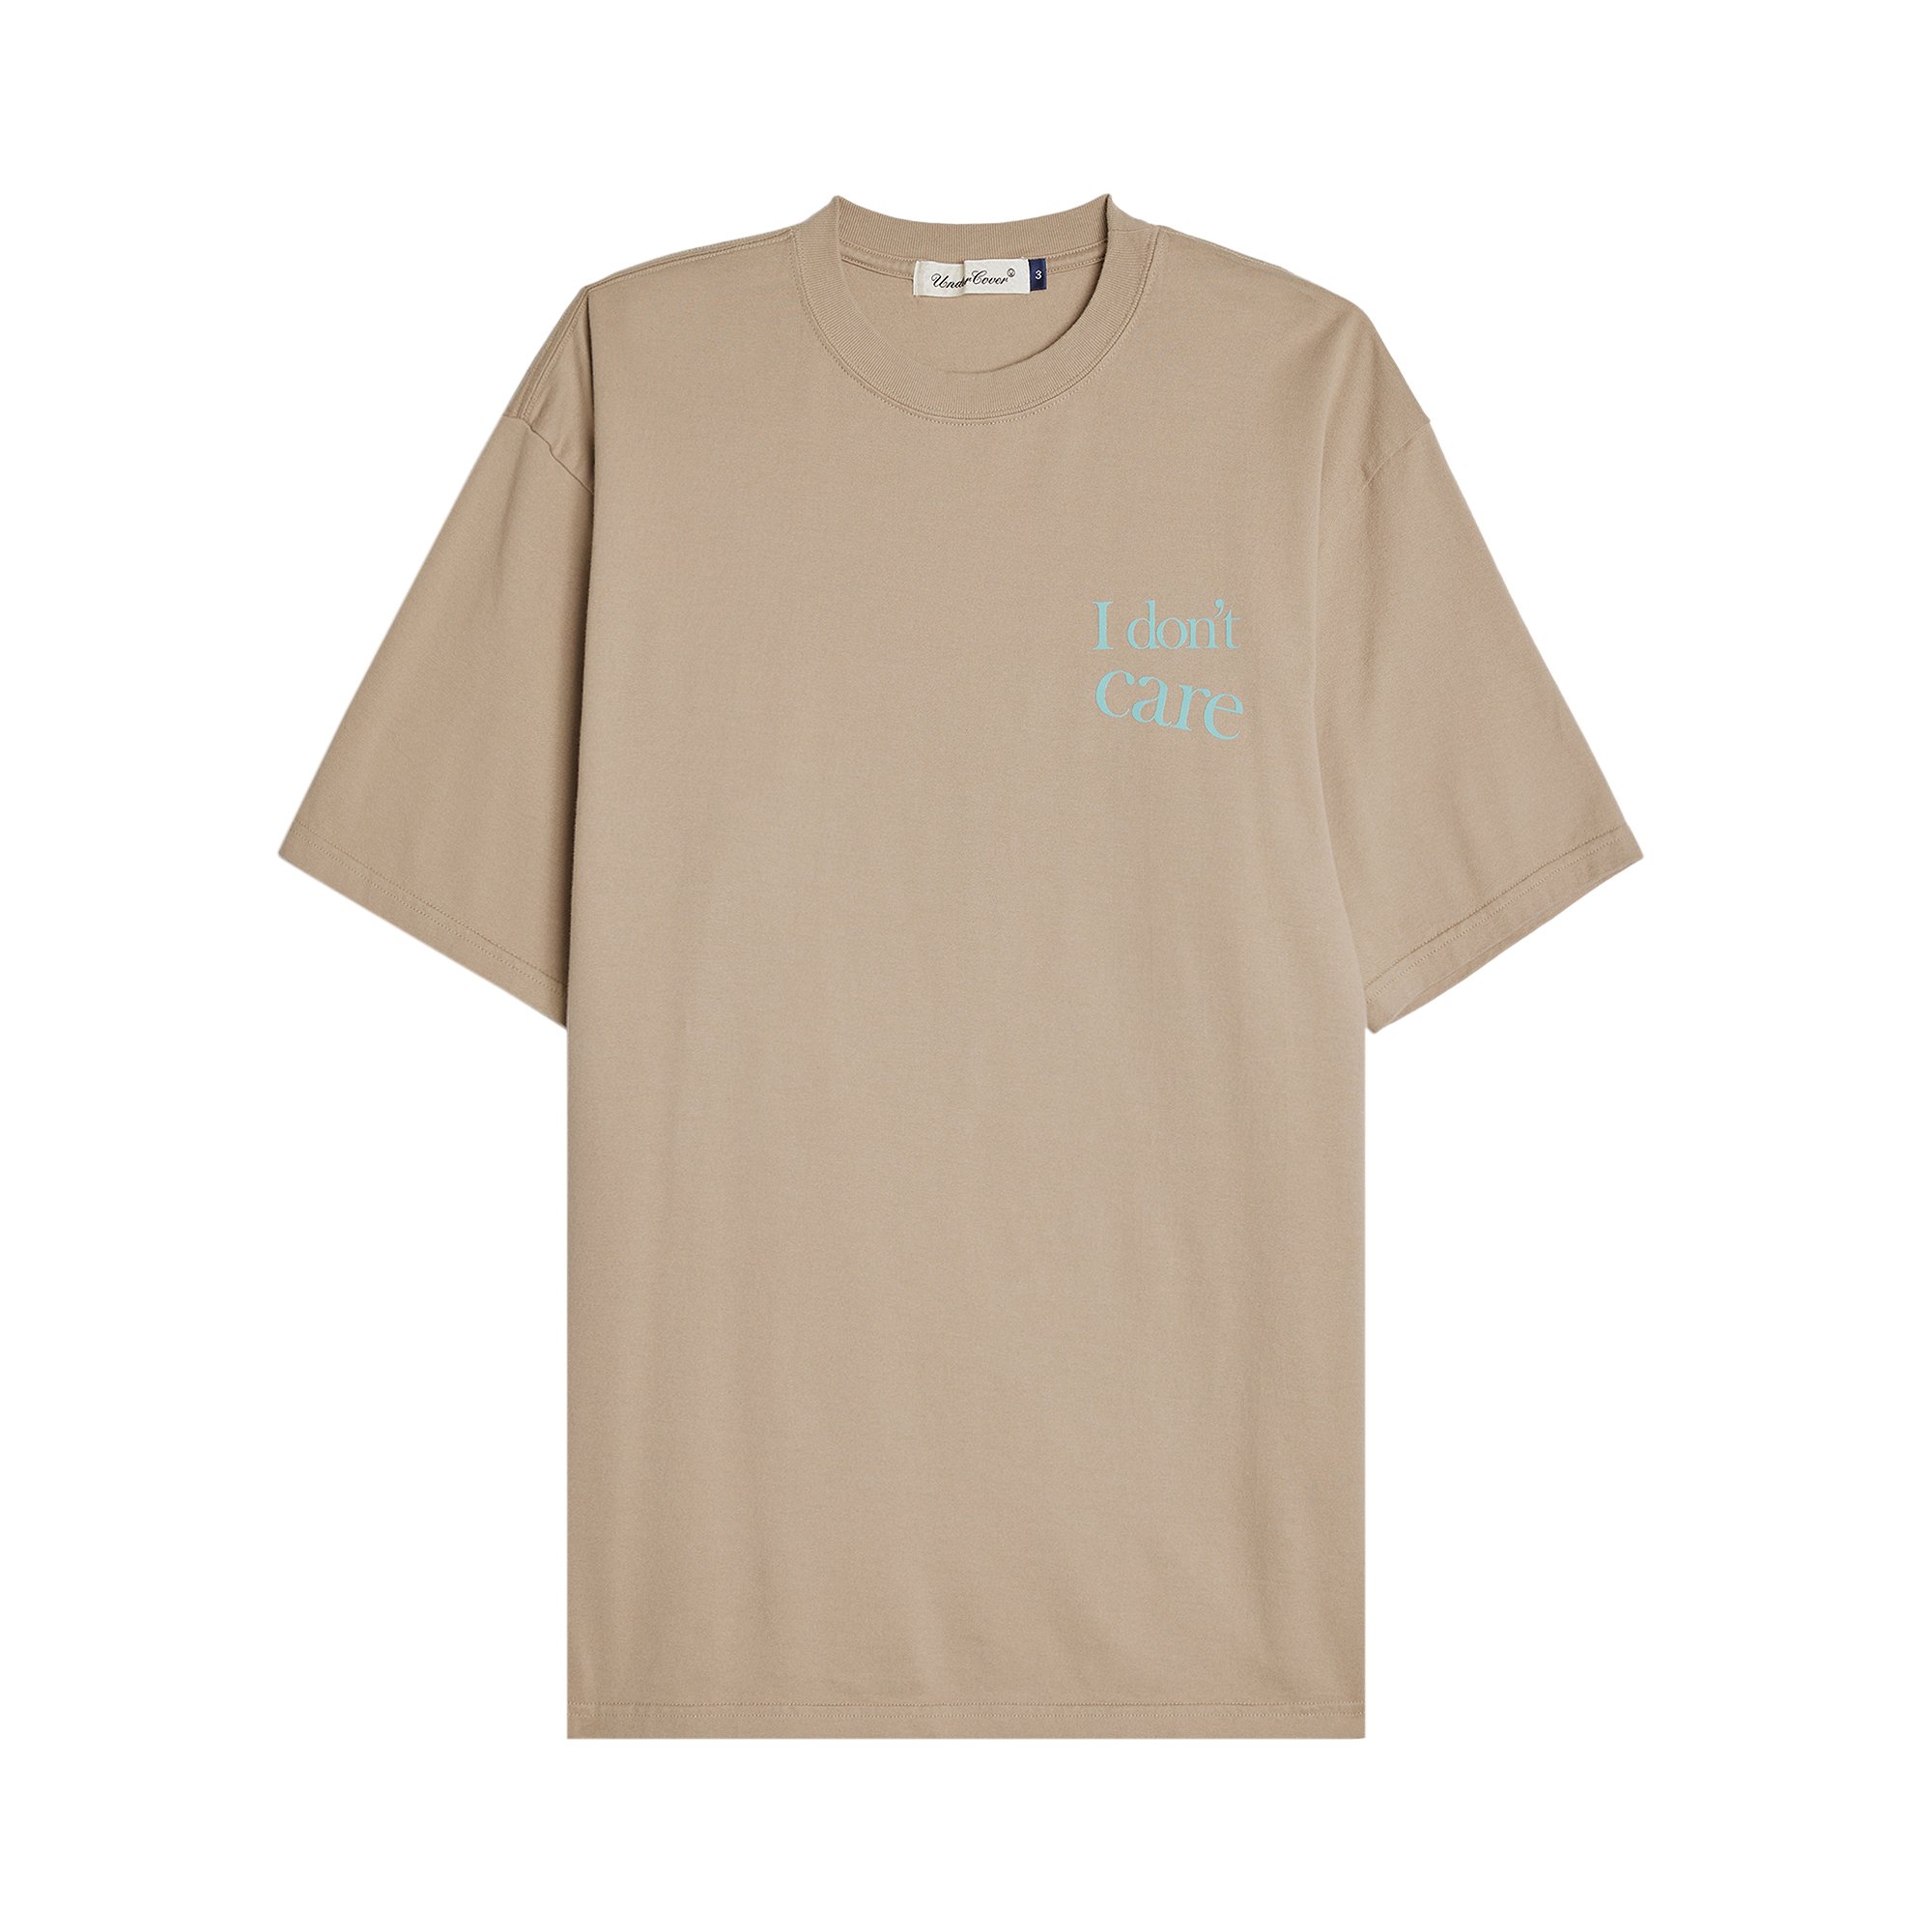 Buy Undercover I Don't Care T-Shirt 'Beige' - UC2C3806 BEIG | GOAT